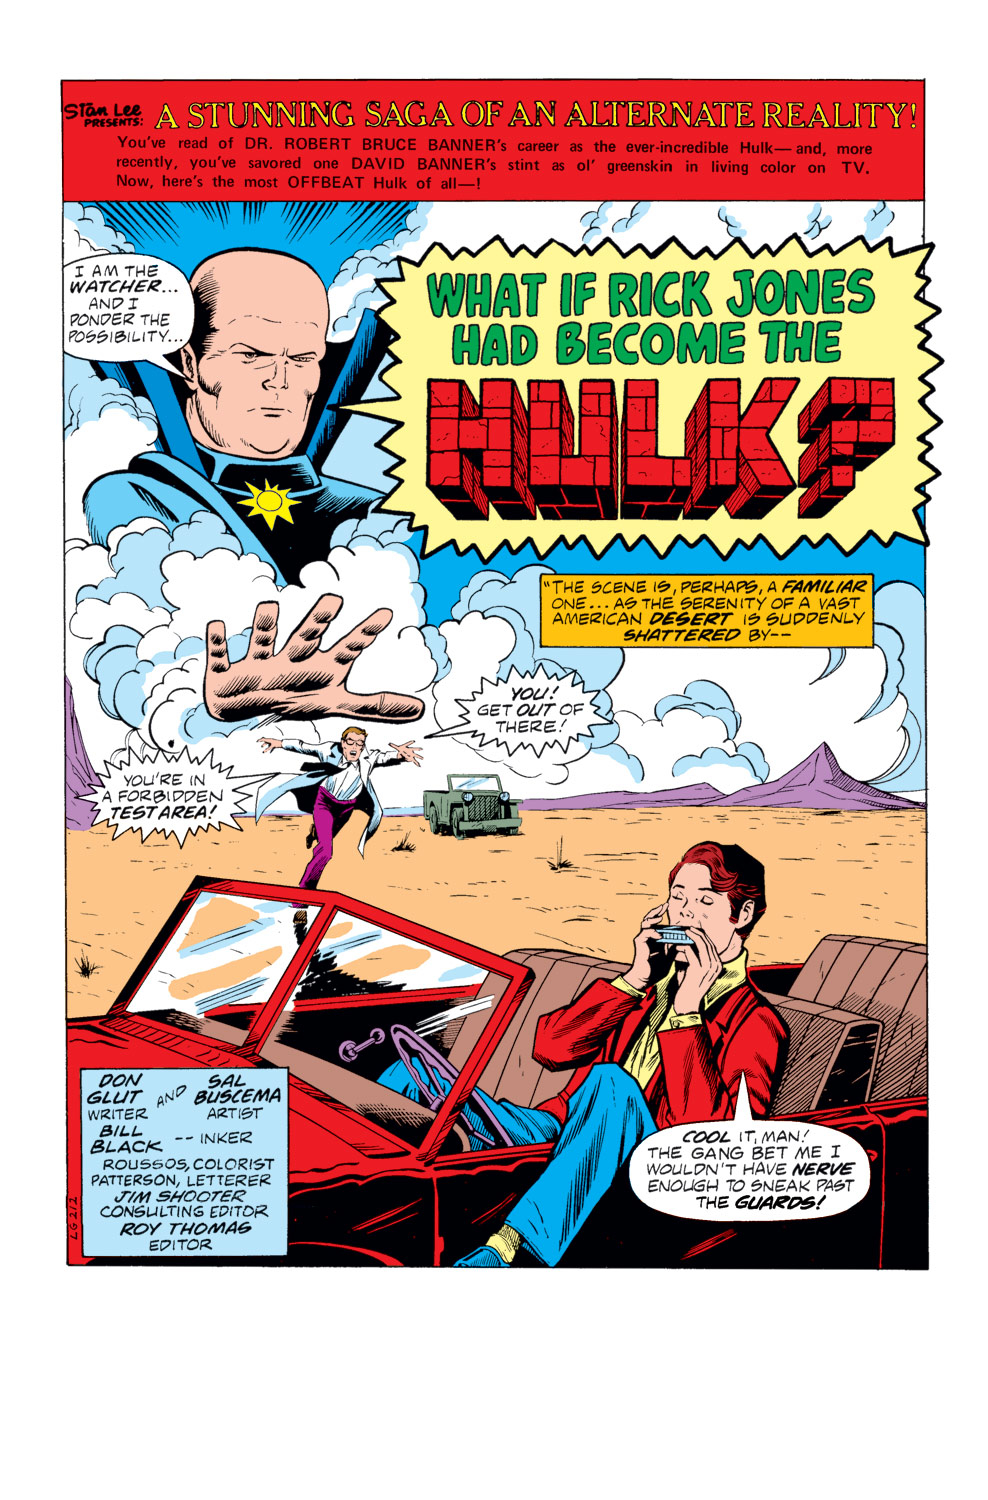 <{ $series->title }} issue 12 - Rick Jones had become the Hulk - Page 2